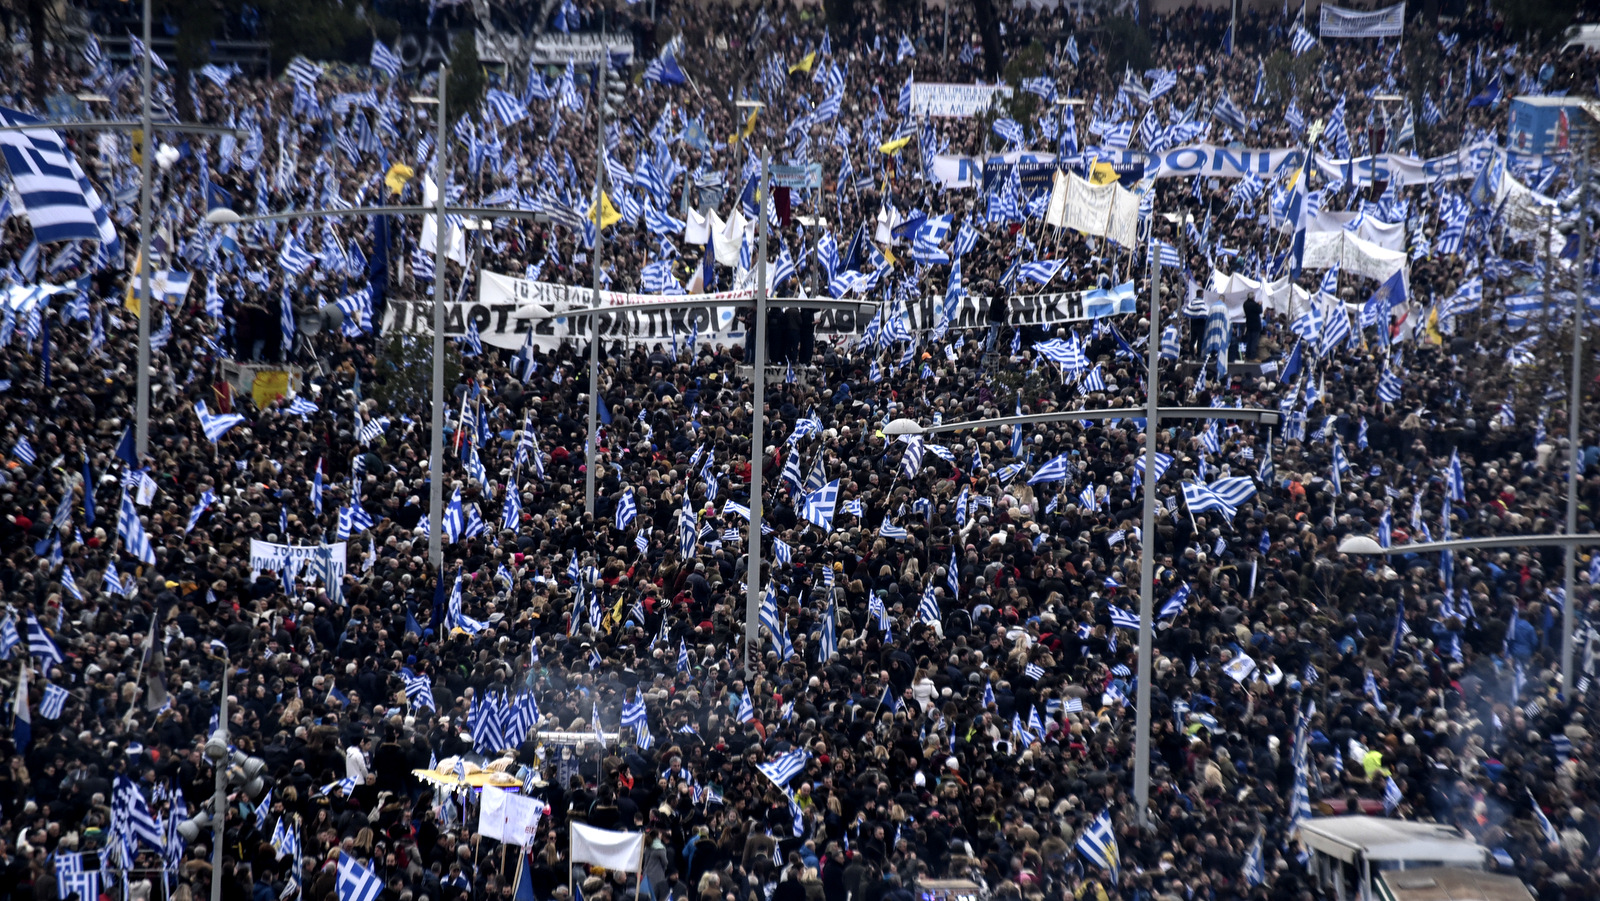 Thousands of protesters take part in a rally against the use of the term "Macedonia" for the northern neighboring country's name, at the northern Greek city of Thessaloniki, Jan. 21, 2018. Over 100,000 Greeks gathered in the northern city of Thessaloniki to demand that the term "Macedonia," the name of the Greek province of which Thessaloniki is the capital, not be used by Greece's northern neighbor known by the same name. (AP/Giannis Papanikos)